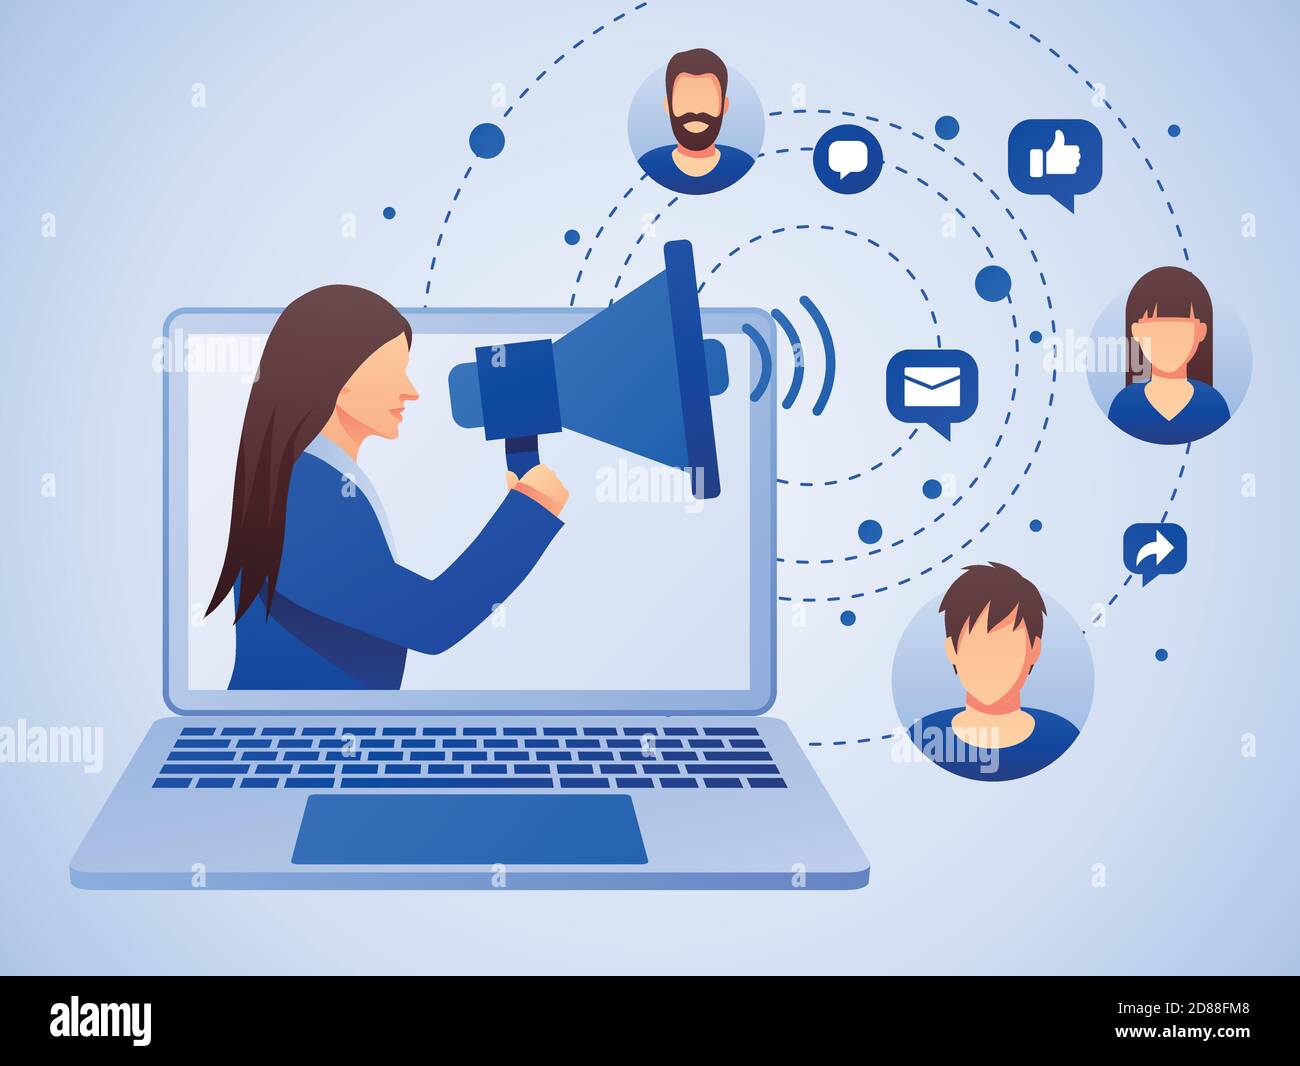 Public relations and marketing background with symbols and people. Social media marketing concept. Flat style design with gradient. Modern vector. Stock Vector